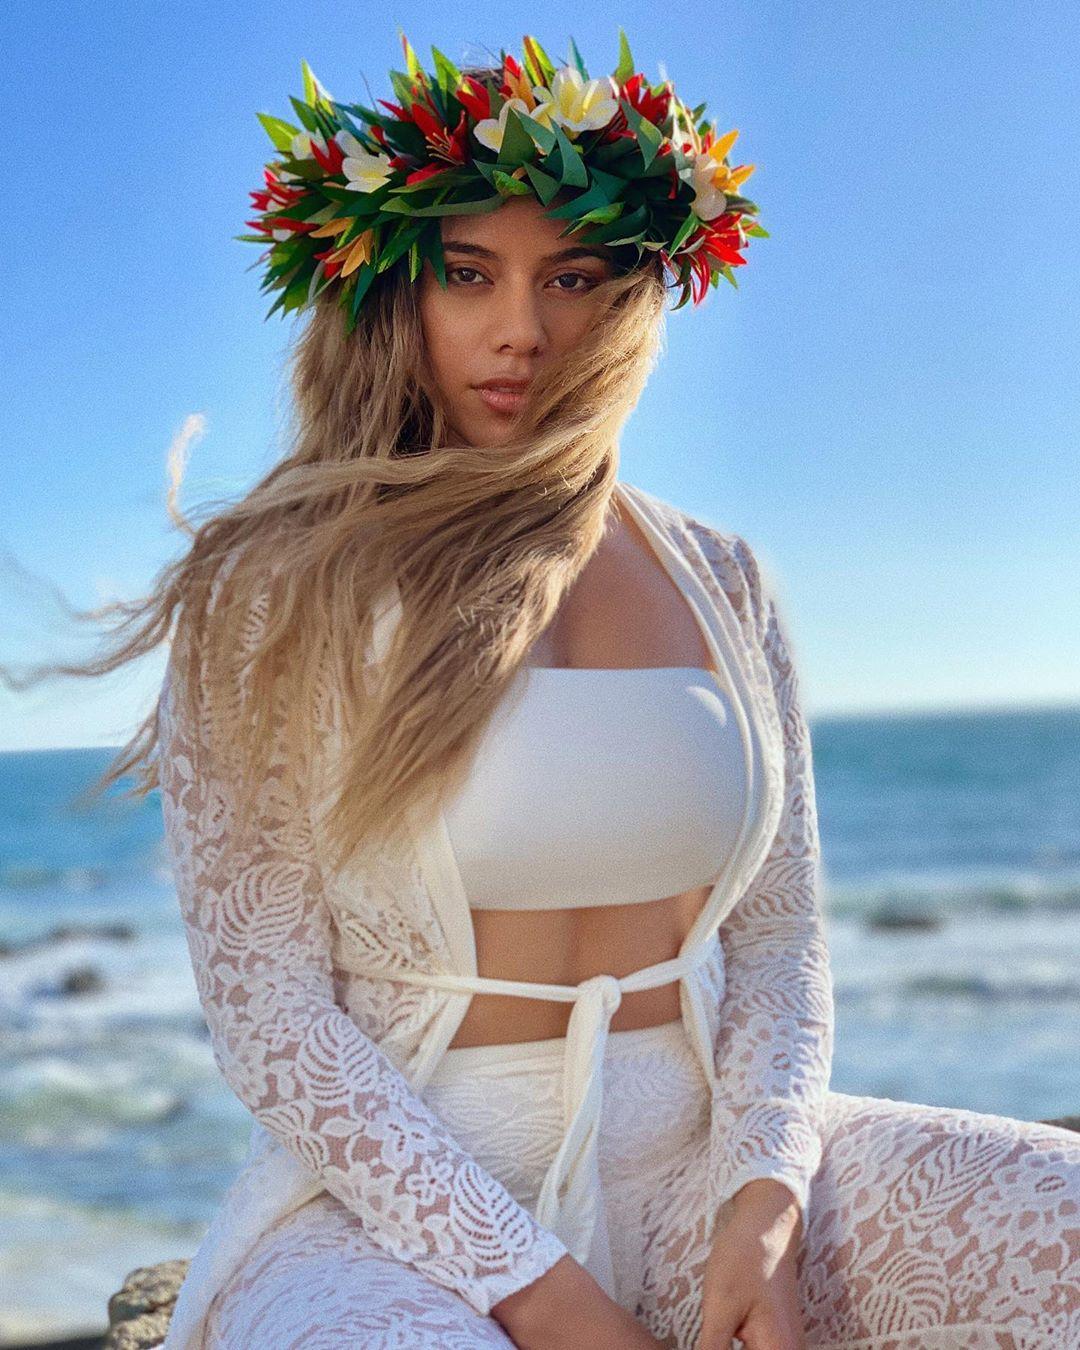 51 Hot Pictures Of Dinah Jane That Will Make Your Heart Pound For Her 16